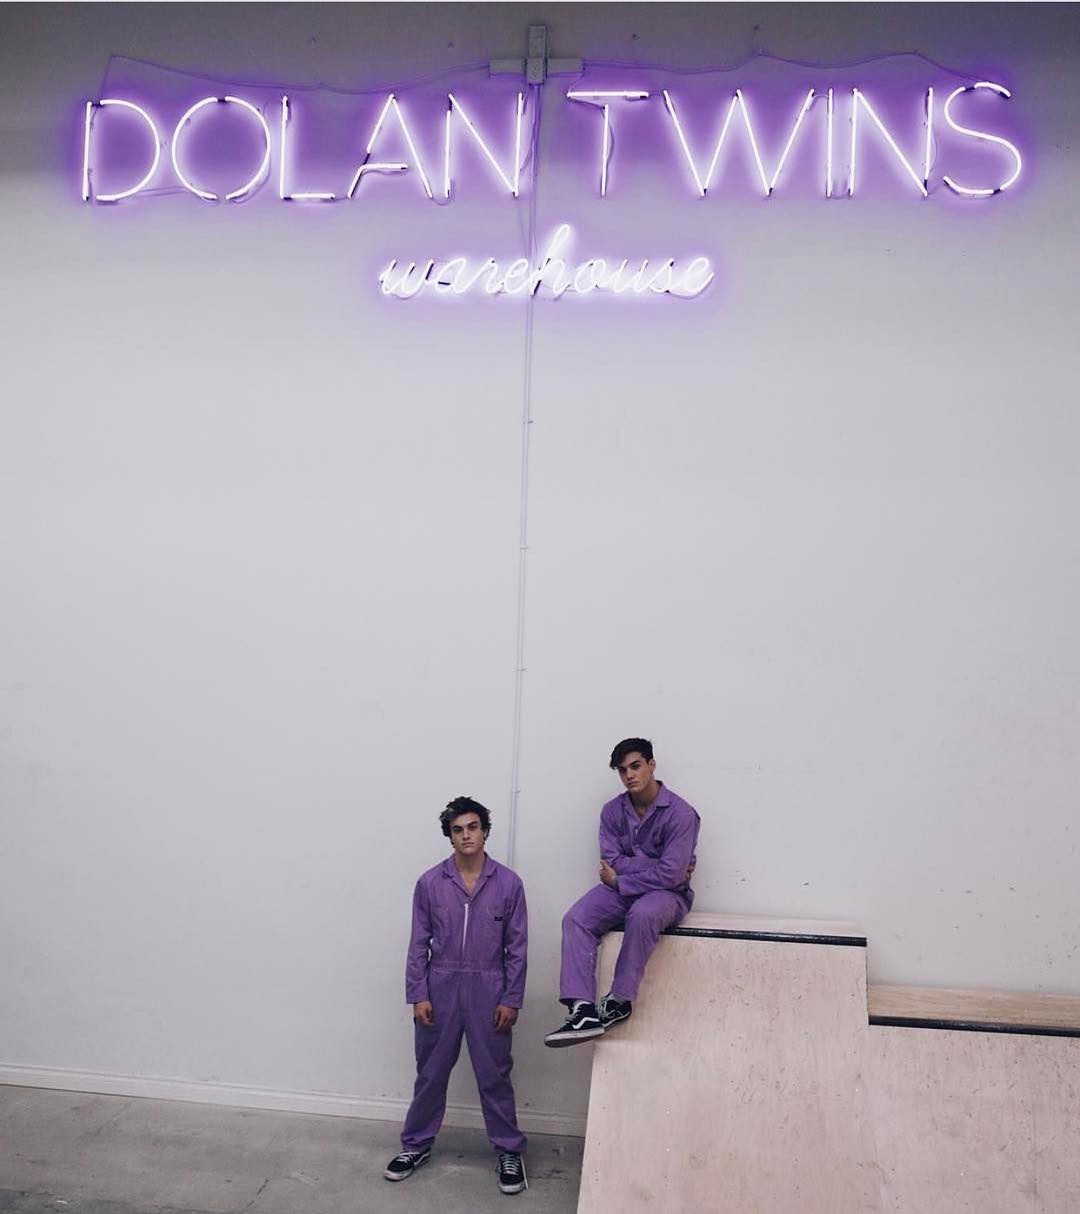 Neon Mfg. and the Dolan Twins